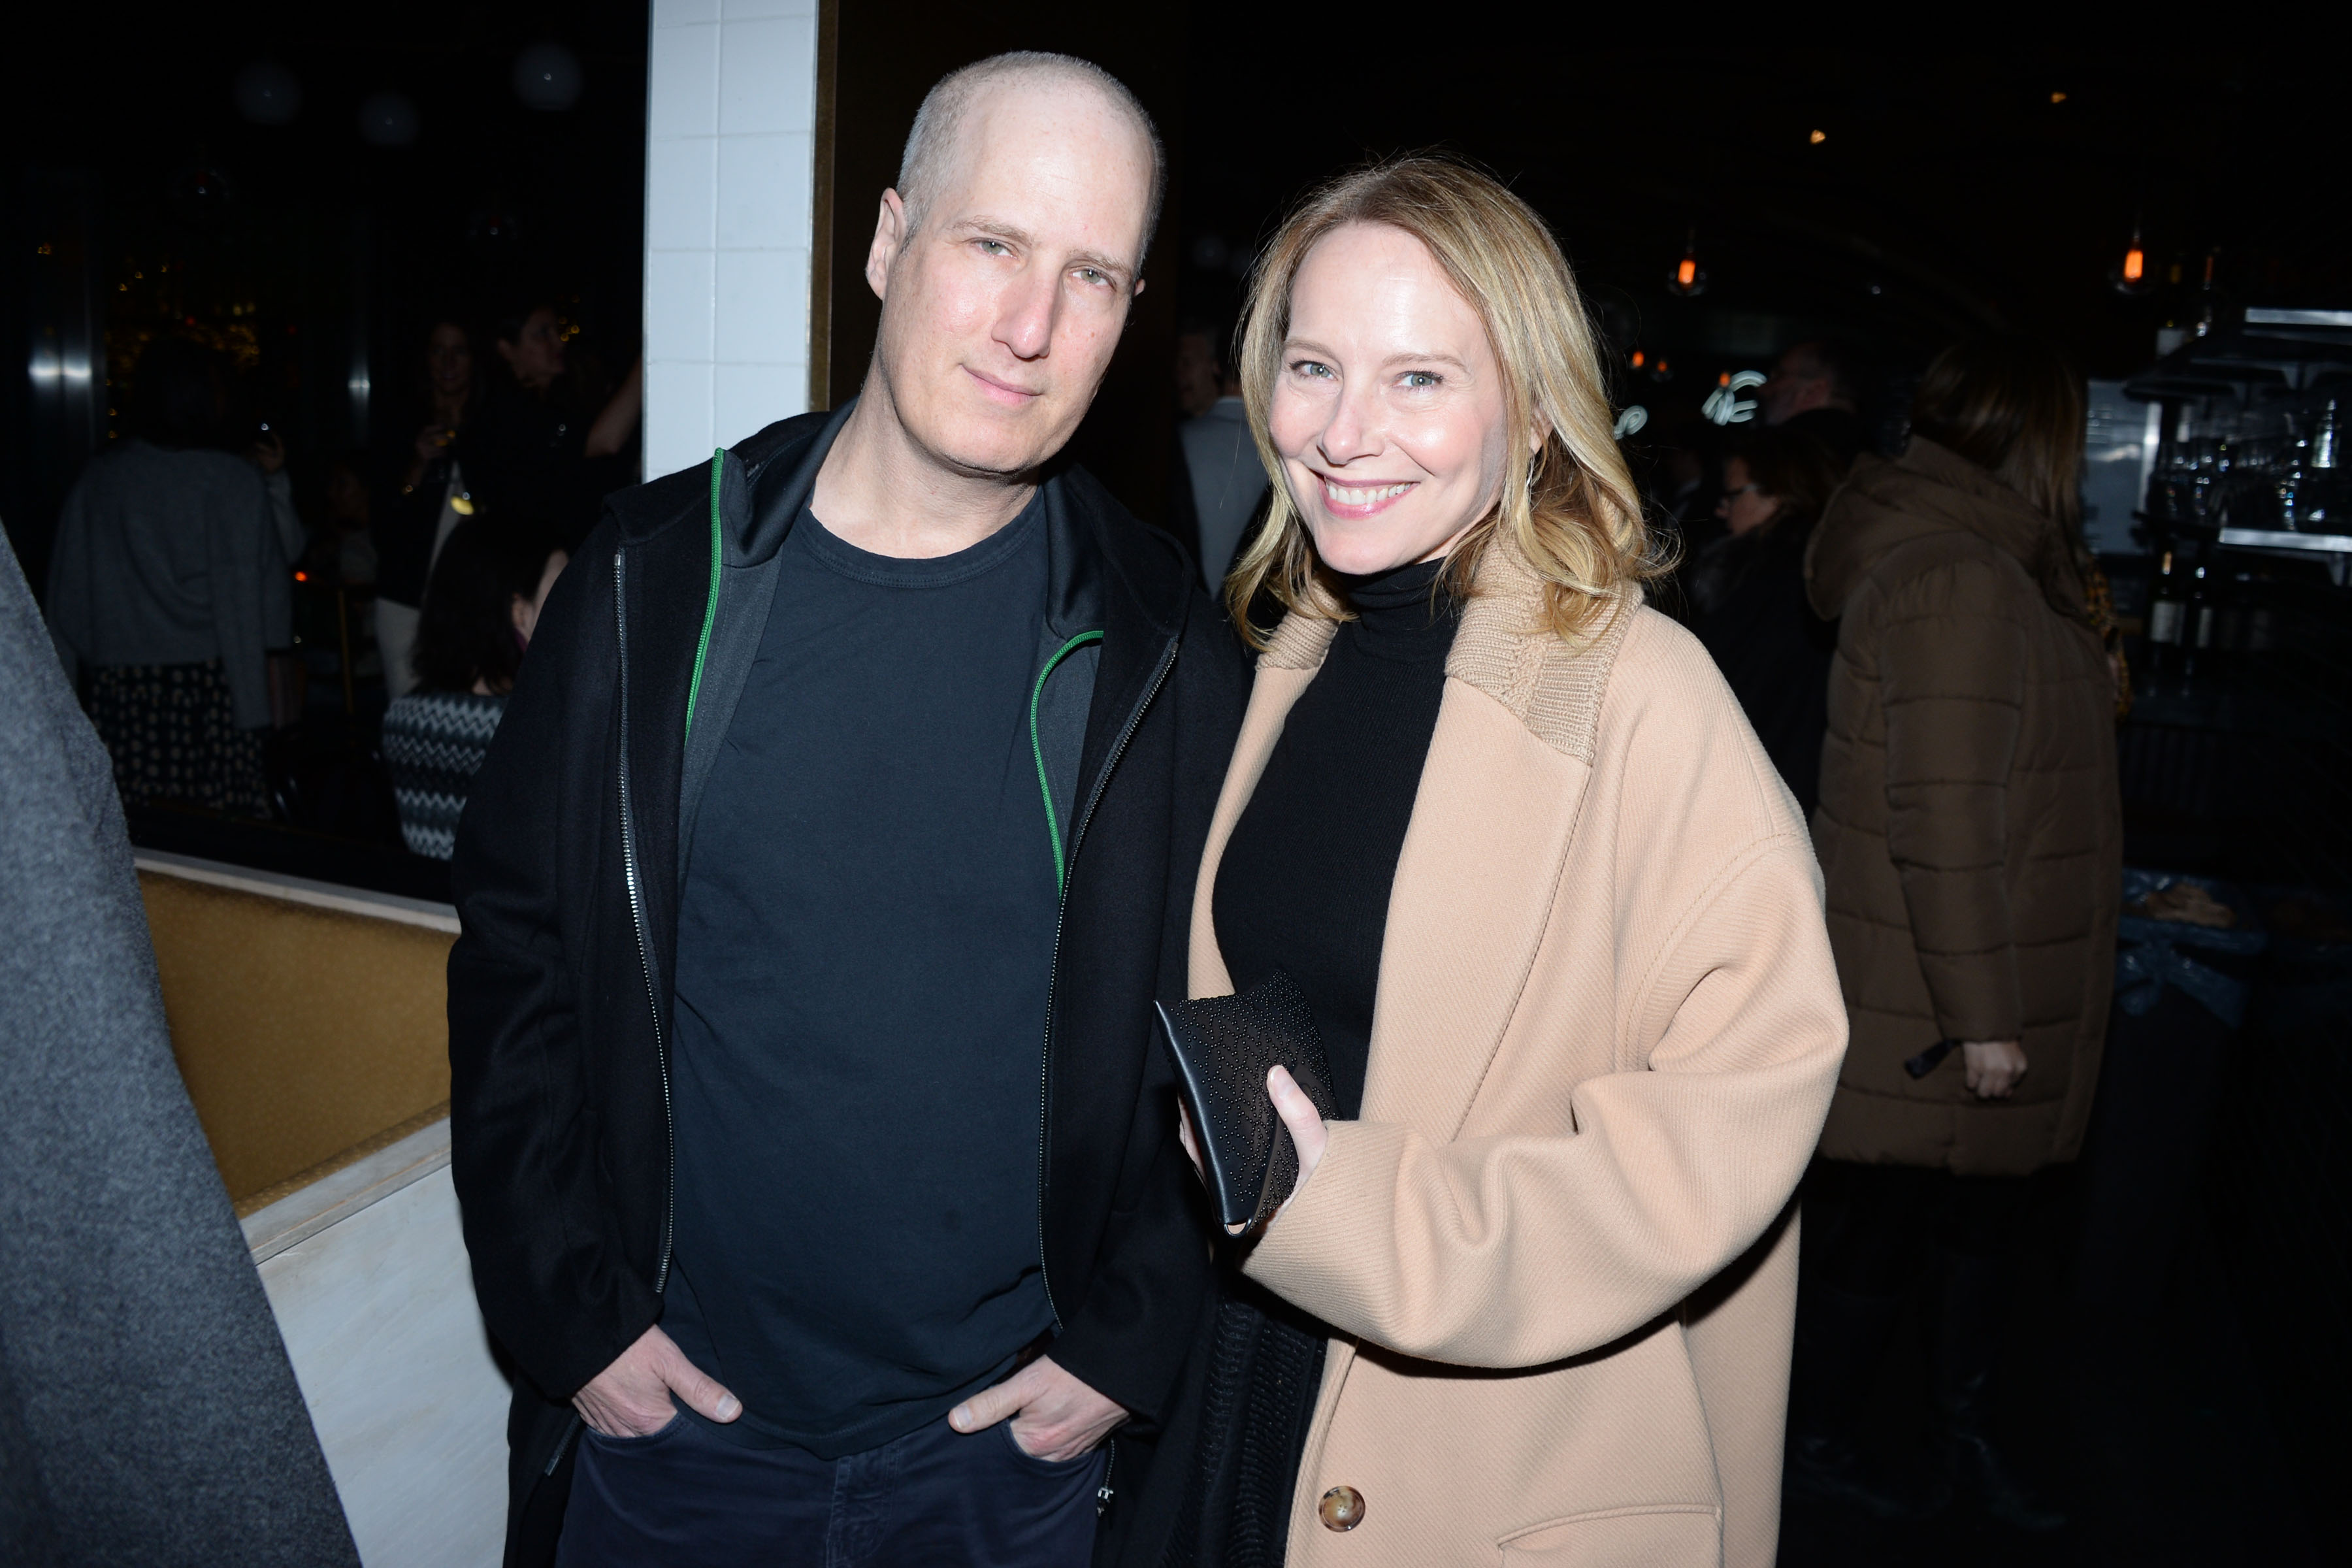 Eric Slovin and Amy Ryan at the screening of "A Beautiful Day In The Neighborhood" after party on November 17, 2019, in New York City. | Source: Getty Images